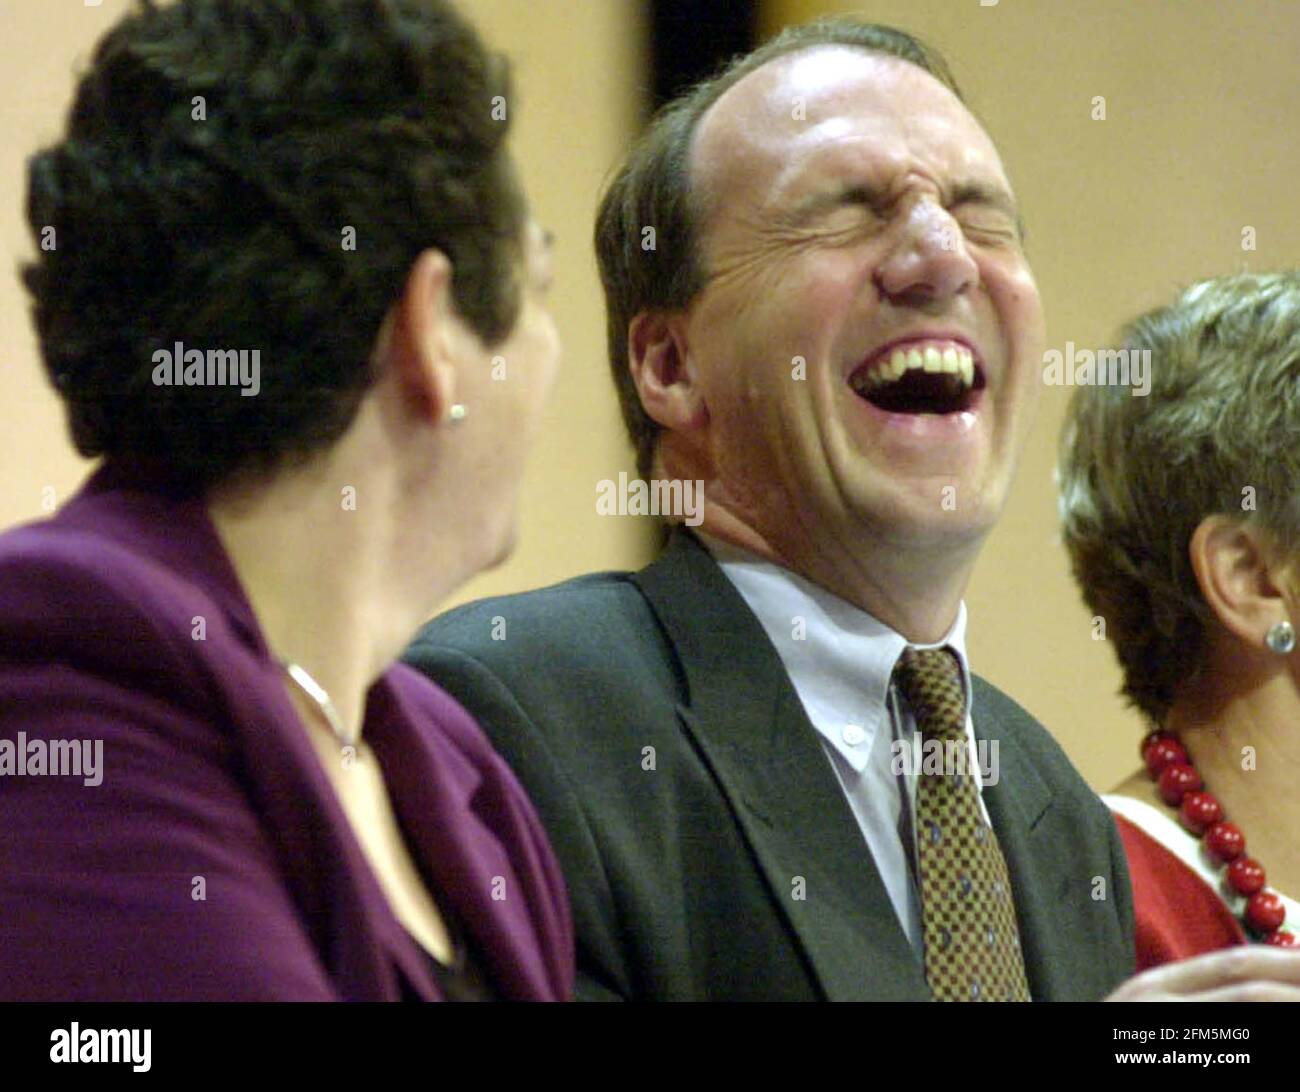 Liberal Democrat conference Bournemouth Sept 2000  Simon Hughes, home affairs spokesman, with Jackie Ballard (left), just before Hughes addressed the conference on crime. 19.9.00   Pic:JOHN VOOS Stock Photo